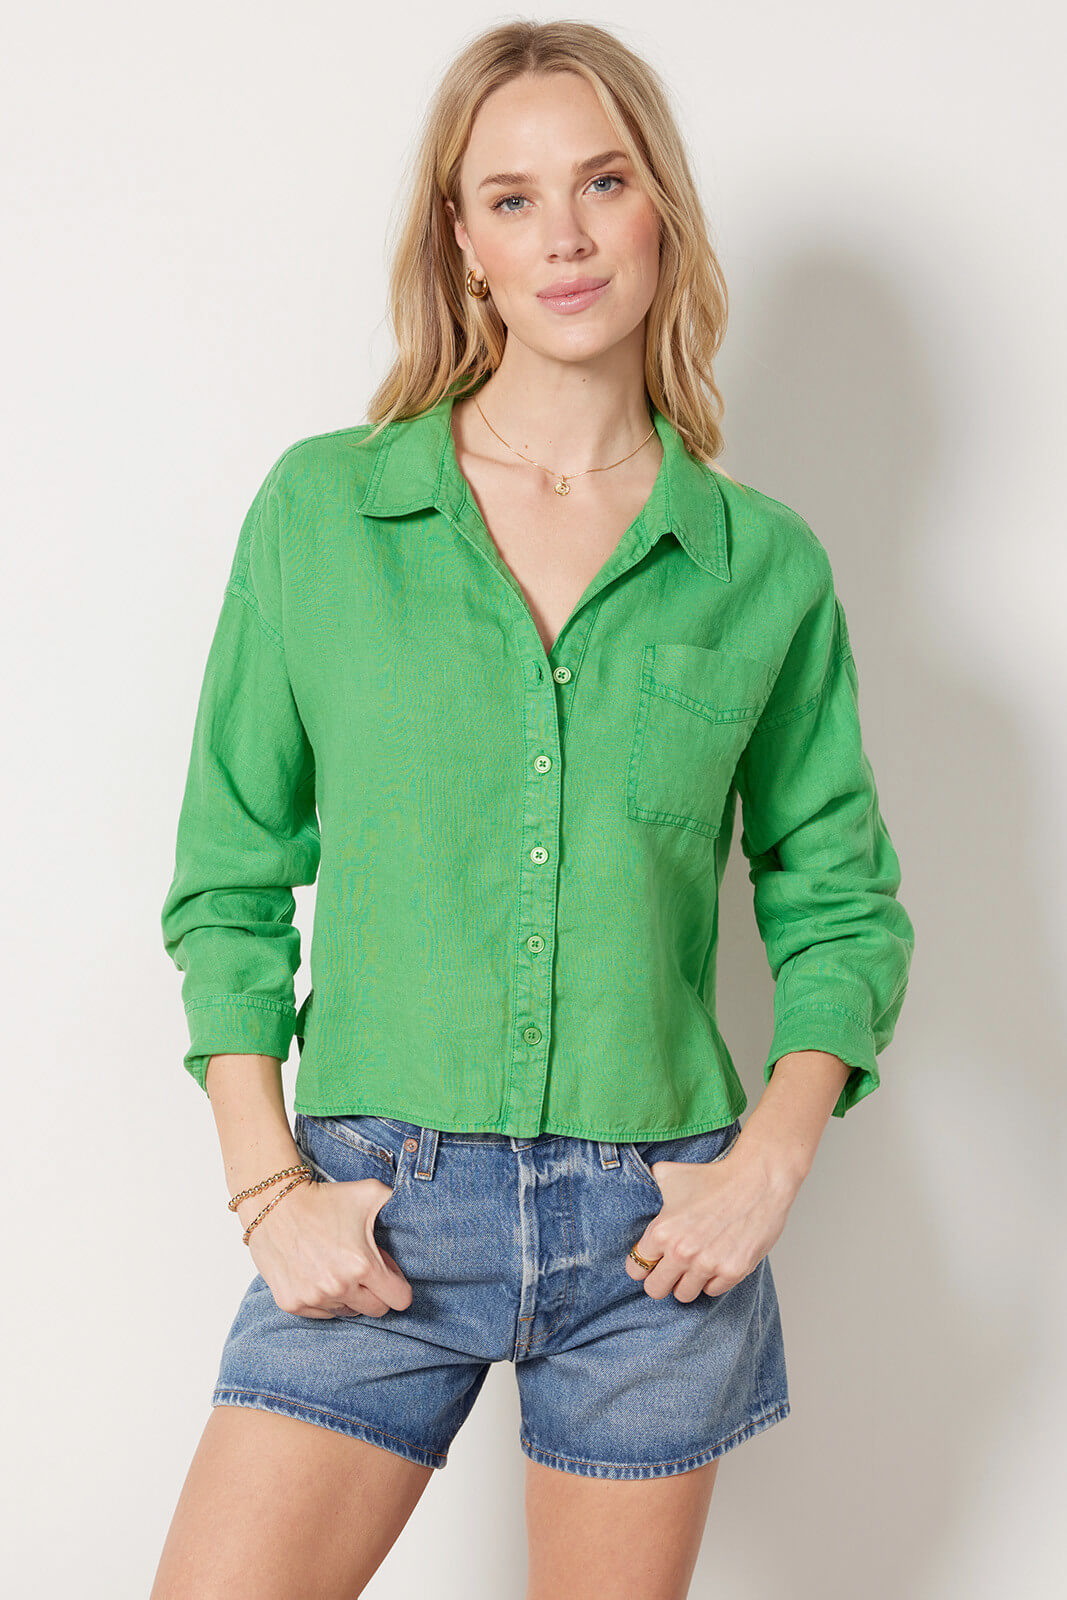 Model in jean shorts and green cropped collared shirt.